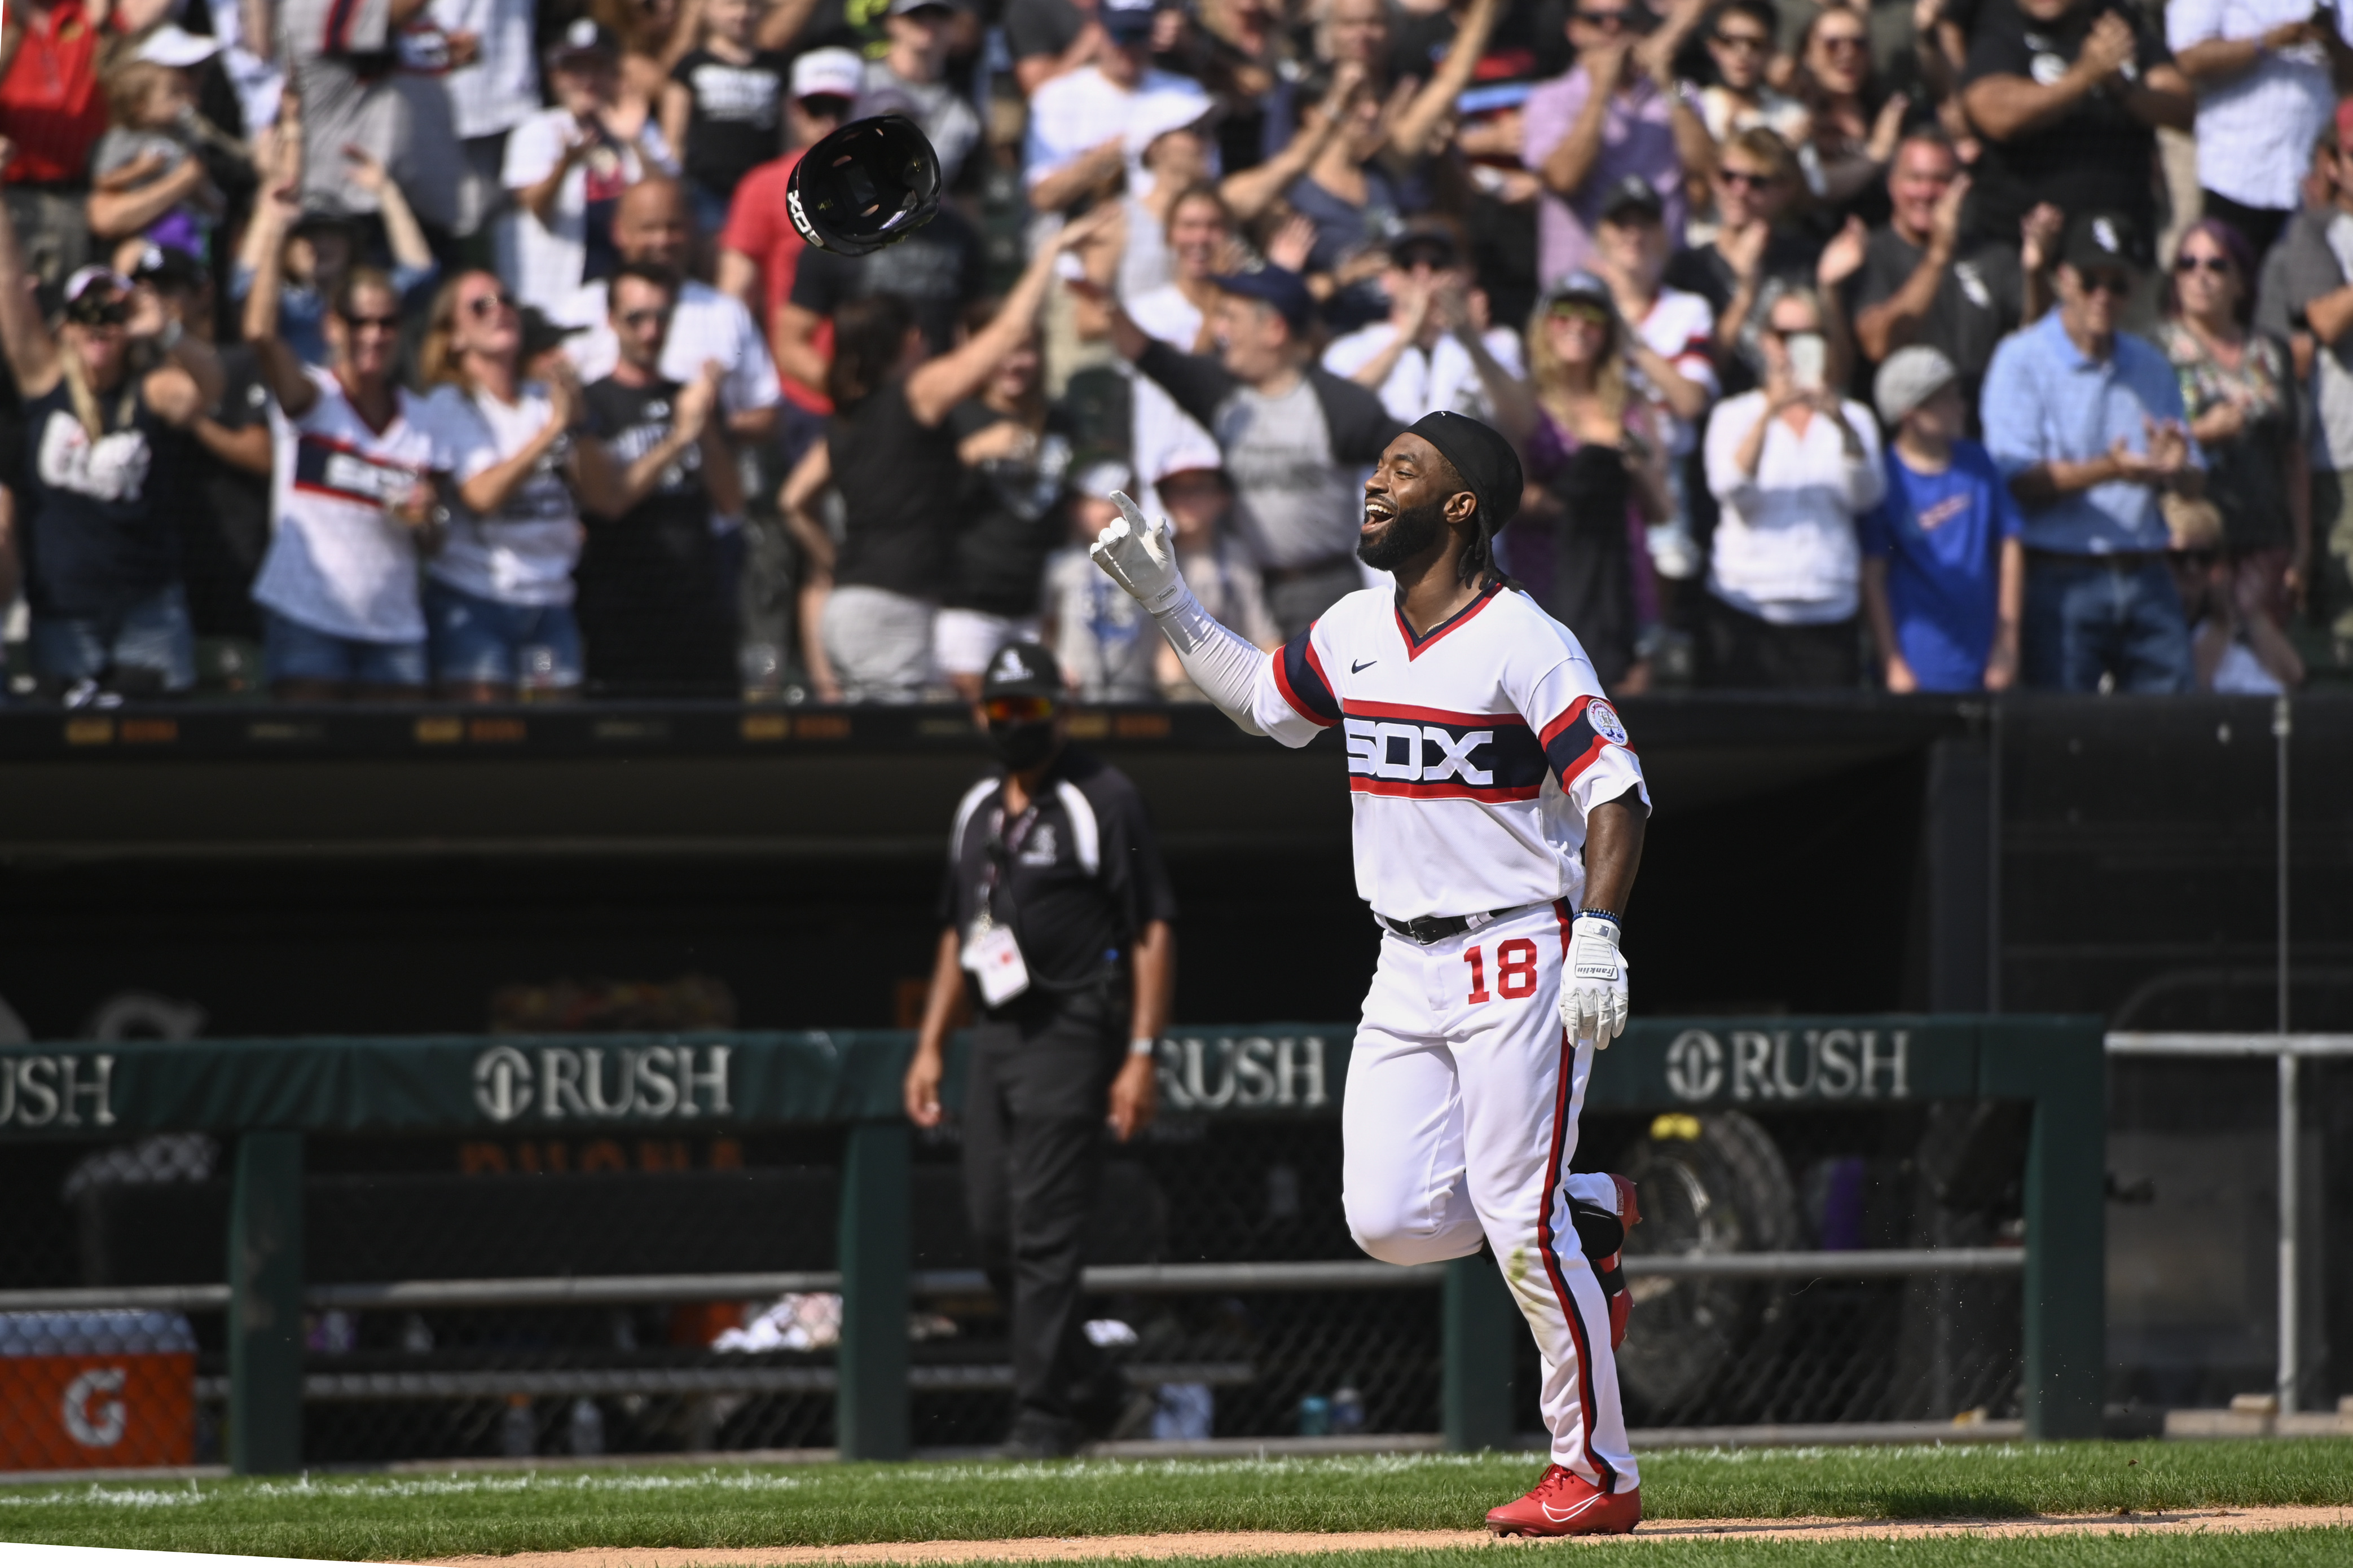 White Sox clinch AL Central with victory over Indians